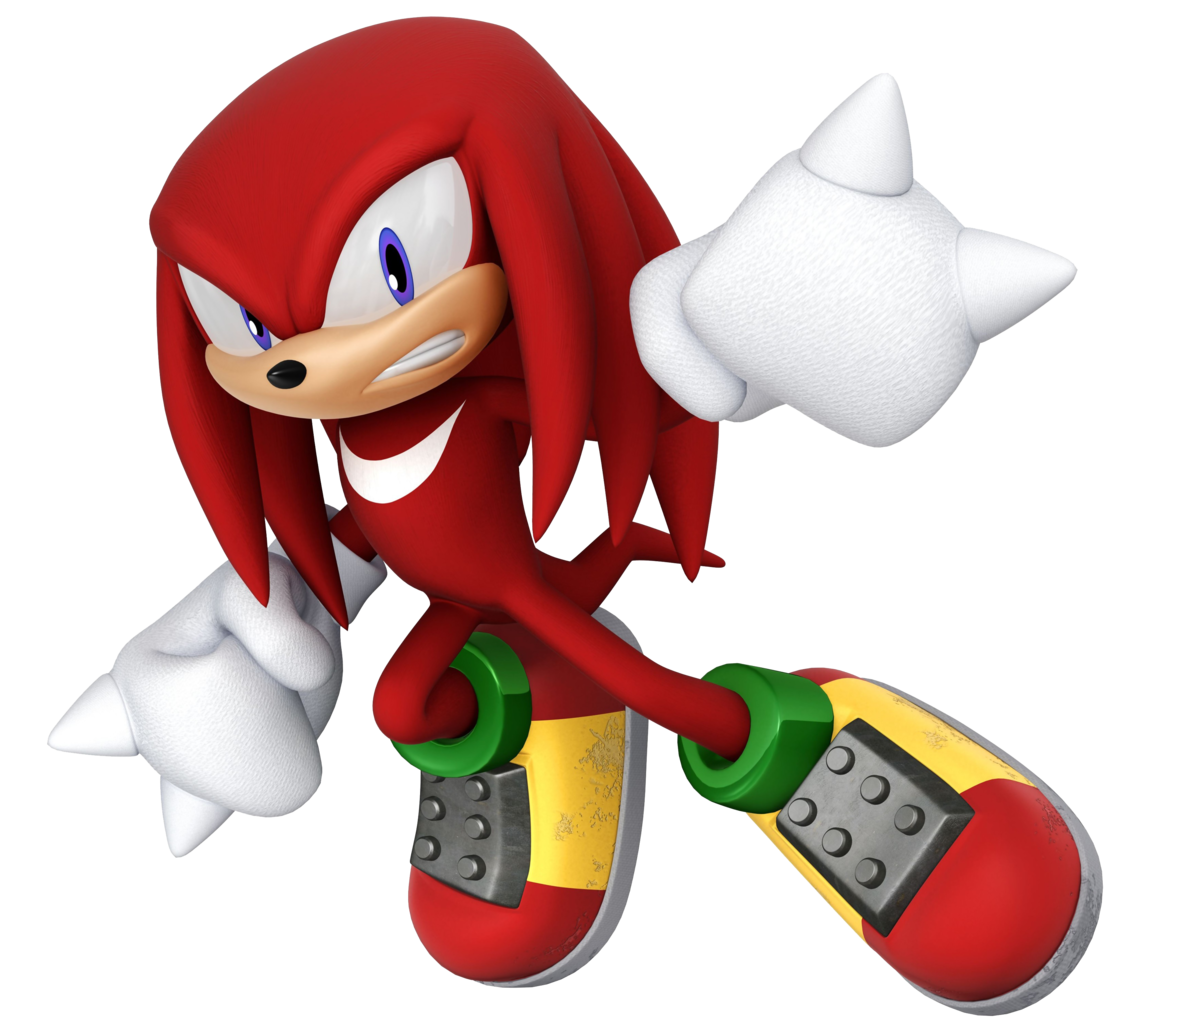 Заголовок: Knuckles The Echidna - Sonic Boom PNG Photos PNG Размер изображе...